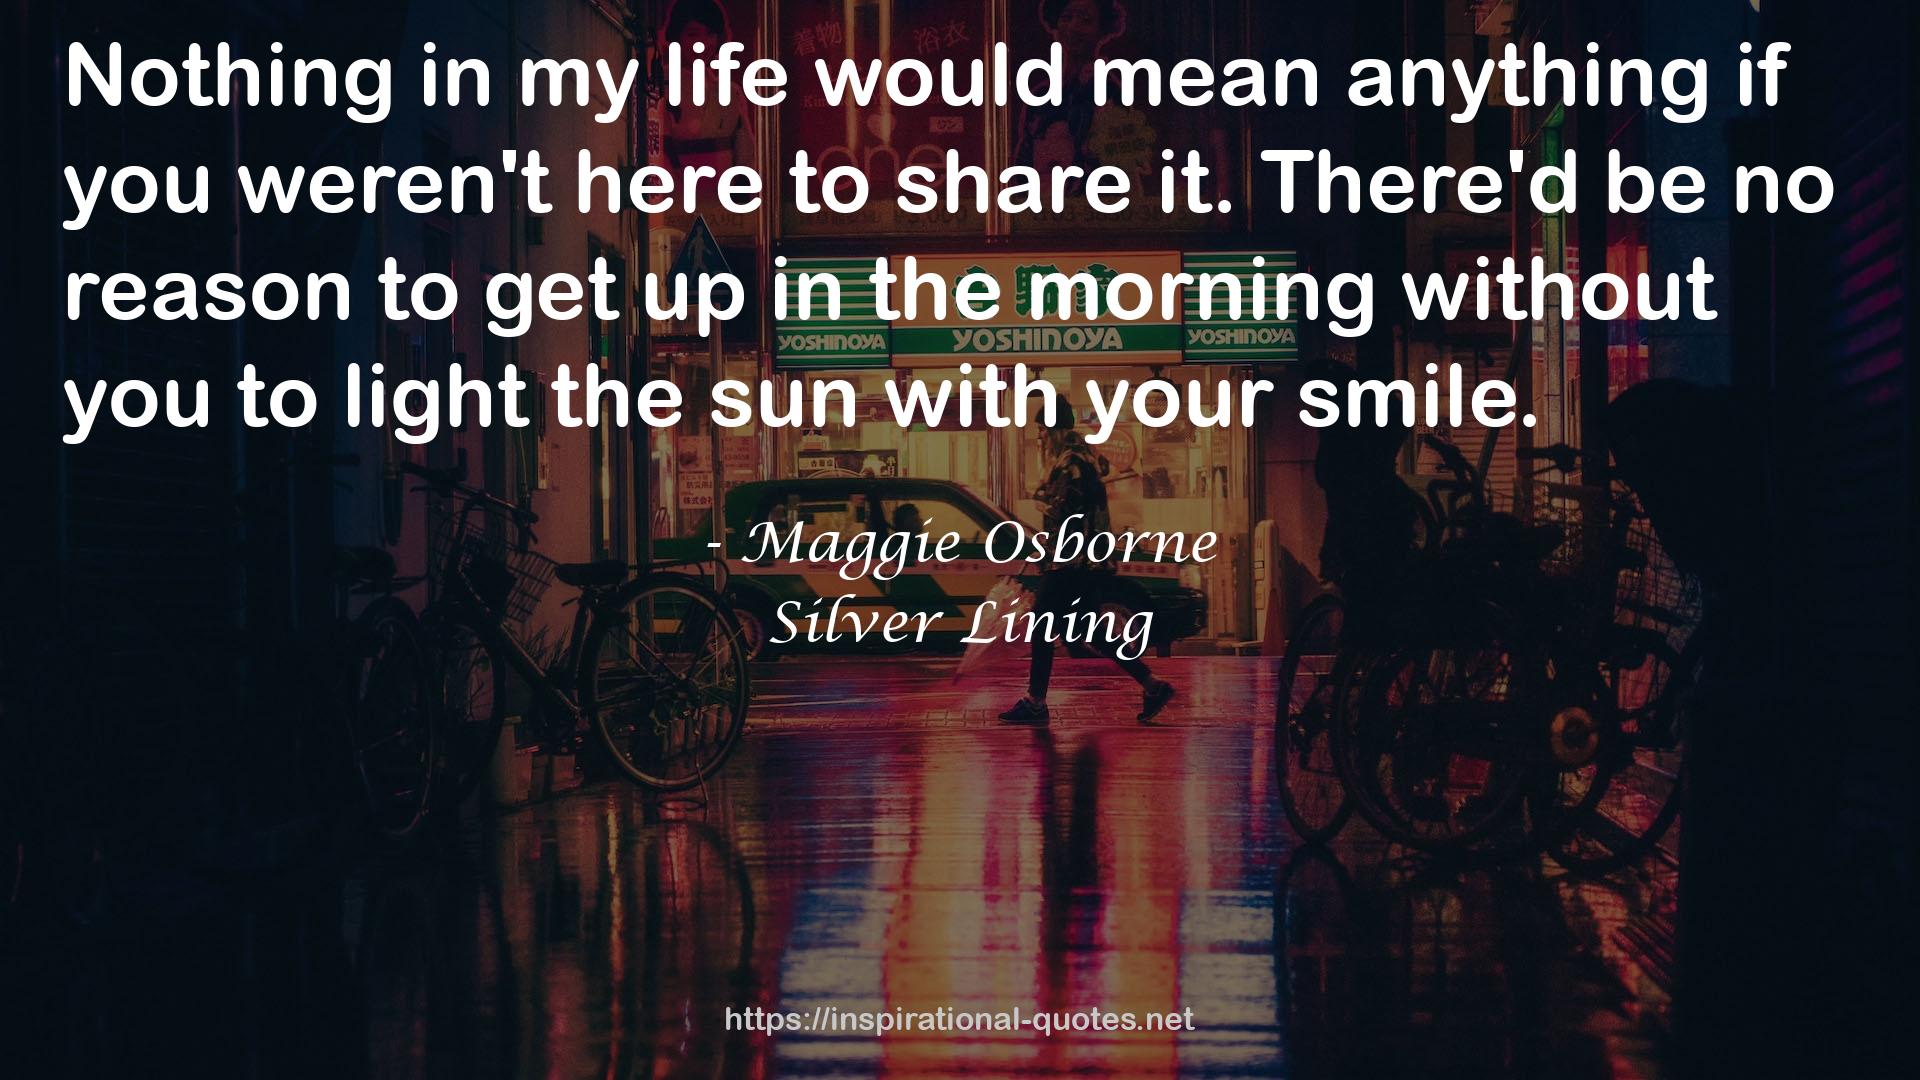 Silver Lining QUOTES